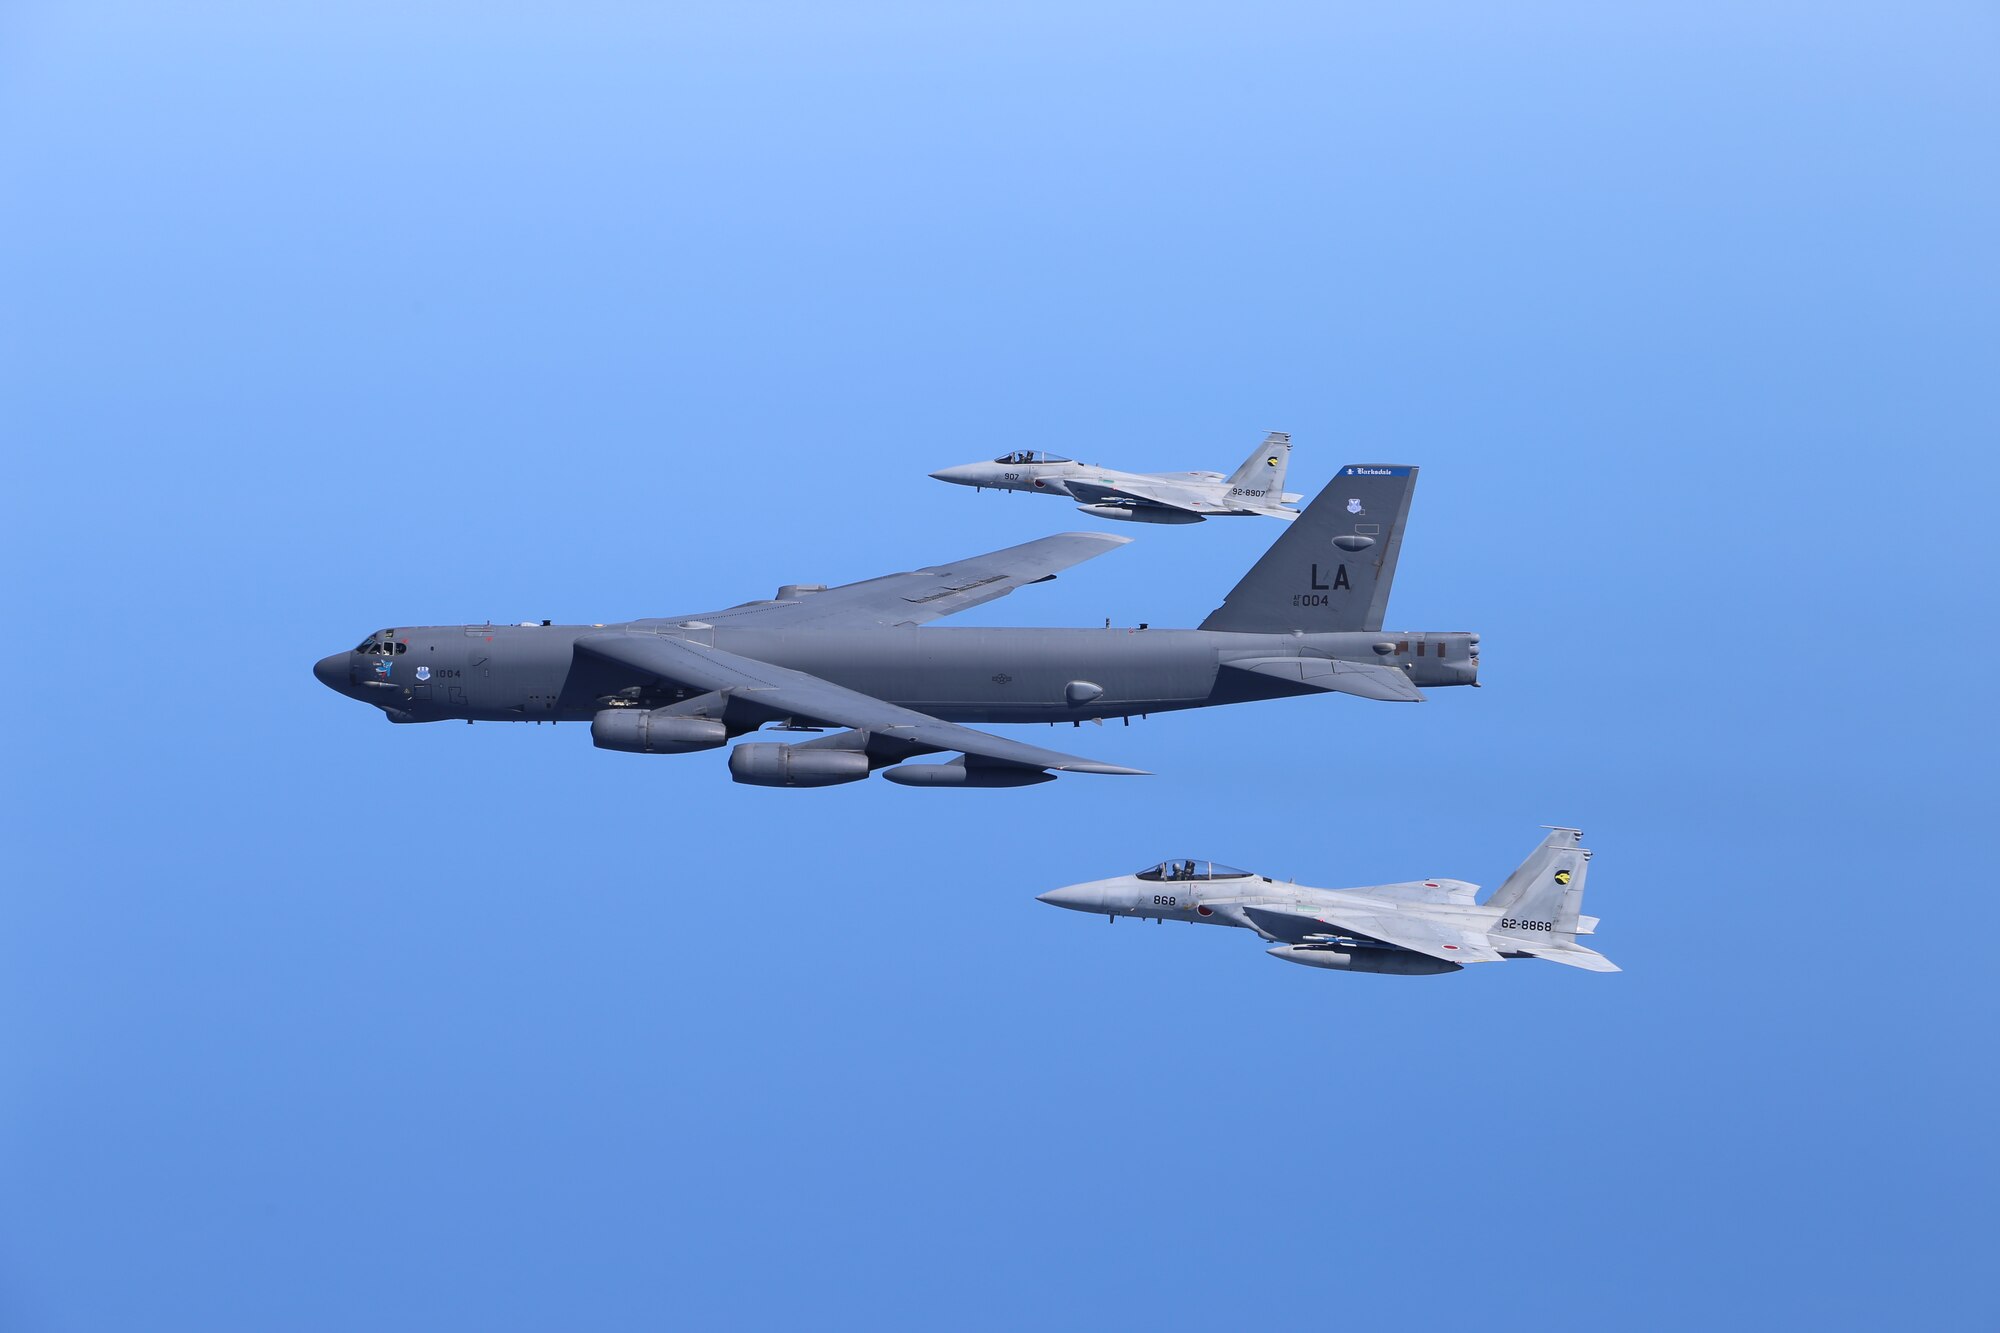 One U.S. Air Force B-52H Stratofortress bombers and two Koku Jieitai (Japan Air Self-Defense Force) F-15 fighters execute a routine bilateral training mission in the vicinity of Japan, July 26, 2018. This mission was flown in support of U.S. Indo-Pacific Command’s Continuous Bomber Presence (CBP) operations, which are a key component to improving combined and joint service interoperability. Bilateral training missions such as this allow the two countries to improve upon combined capabilities, tactical skills, and relationships. (Courtesy Photo)